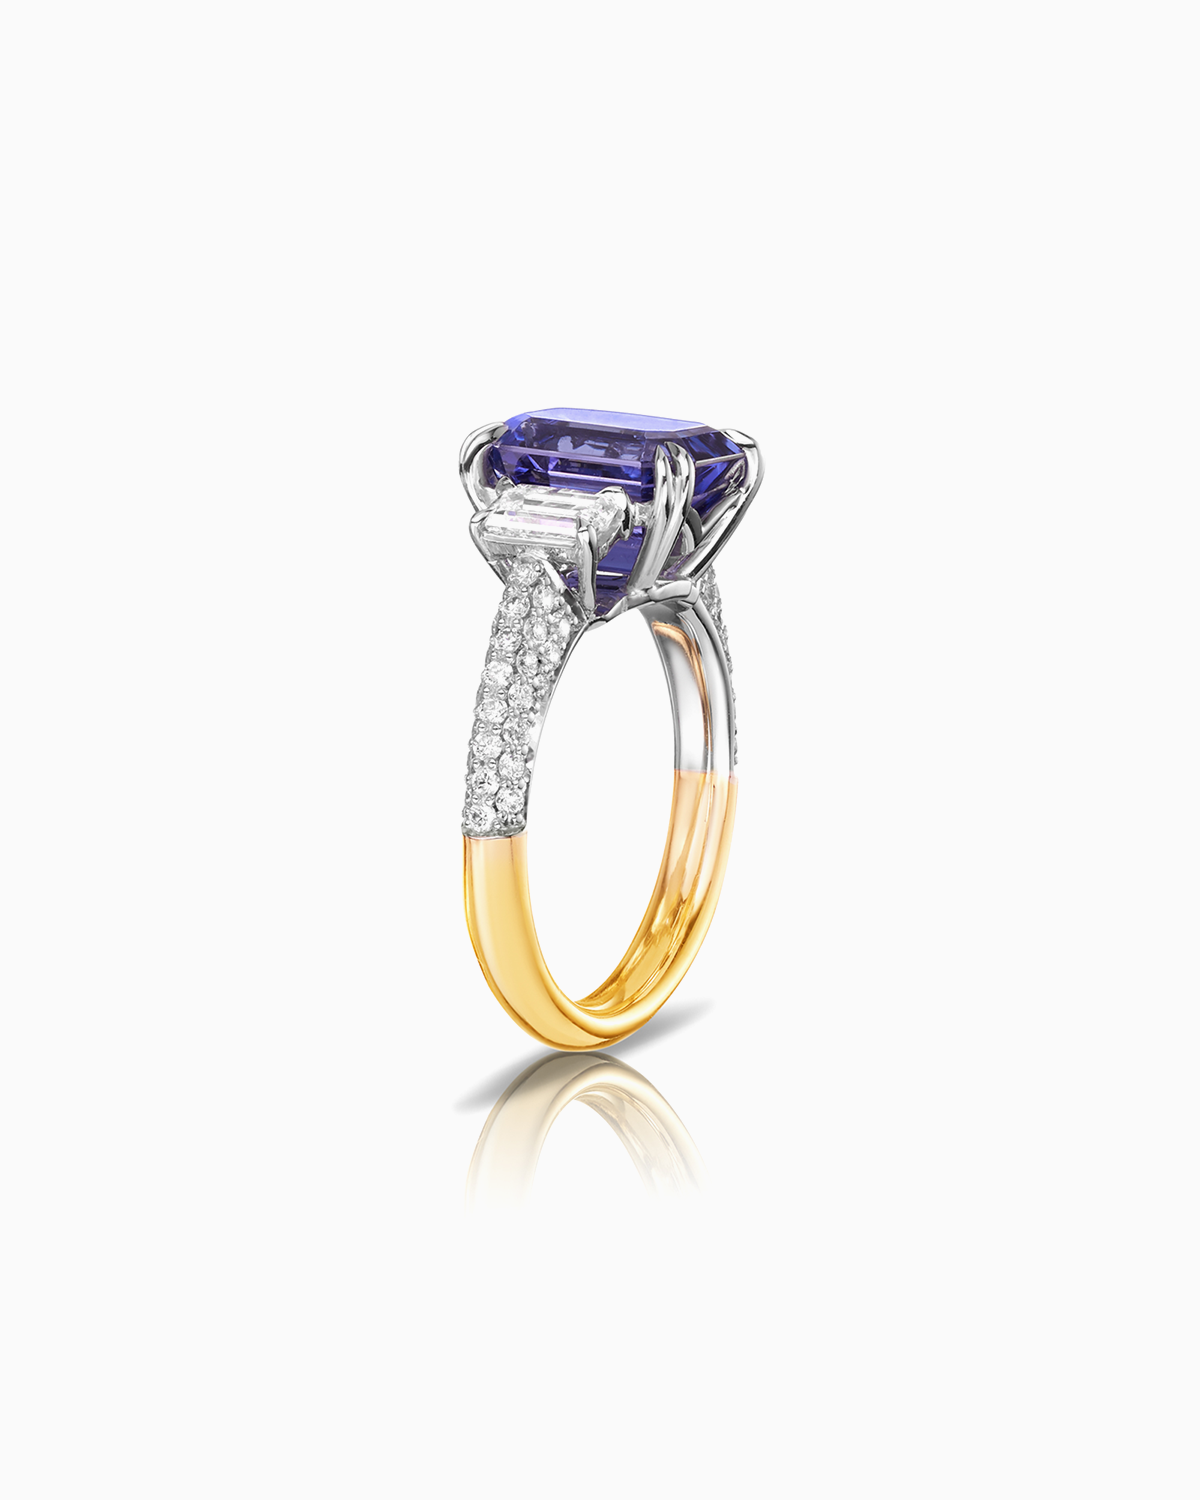 Side view of 3.78ct tanzanite and diamond trilogy with pave set diamond shoulders and 18 karat white and yellow gold by claude and me jewellery.